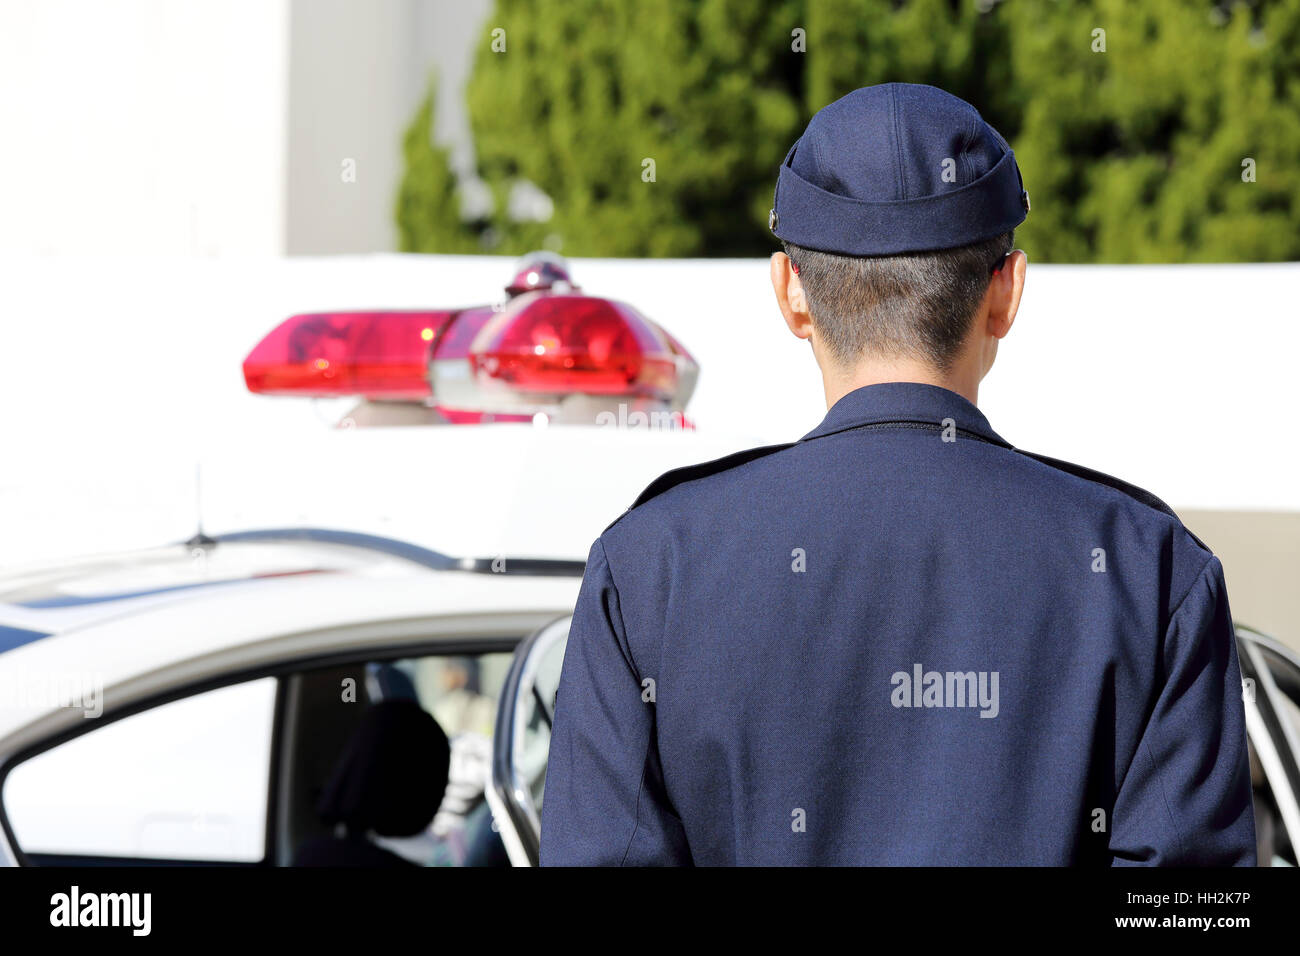 Back view of Japanese police officer with patrol car Stock Photo